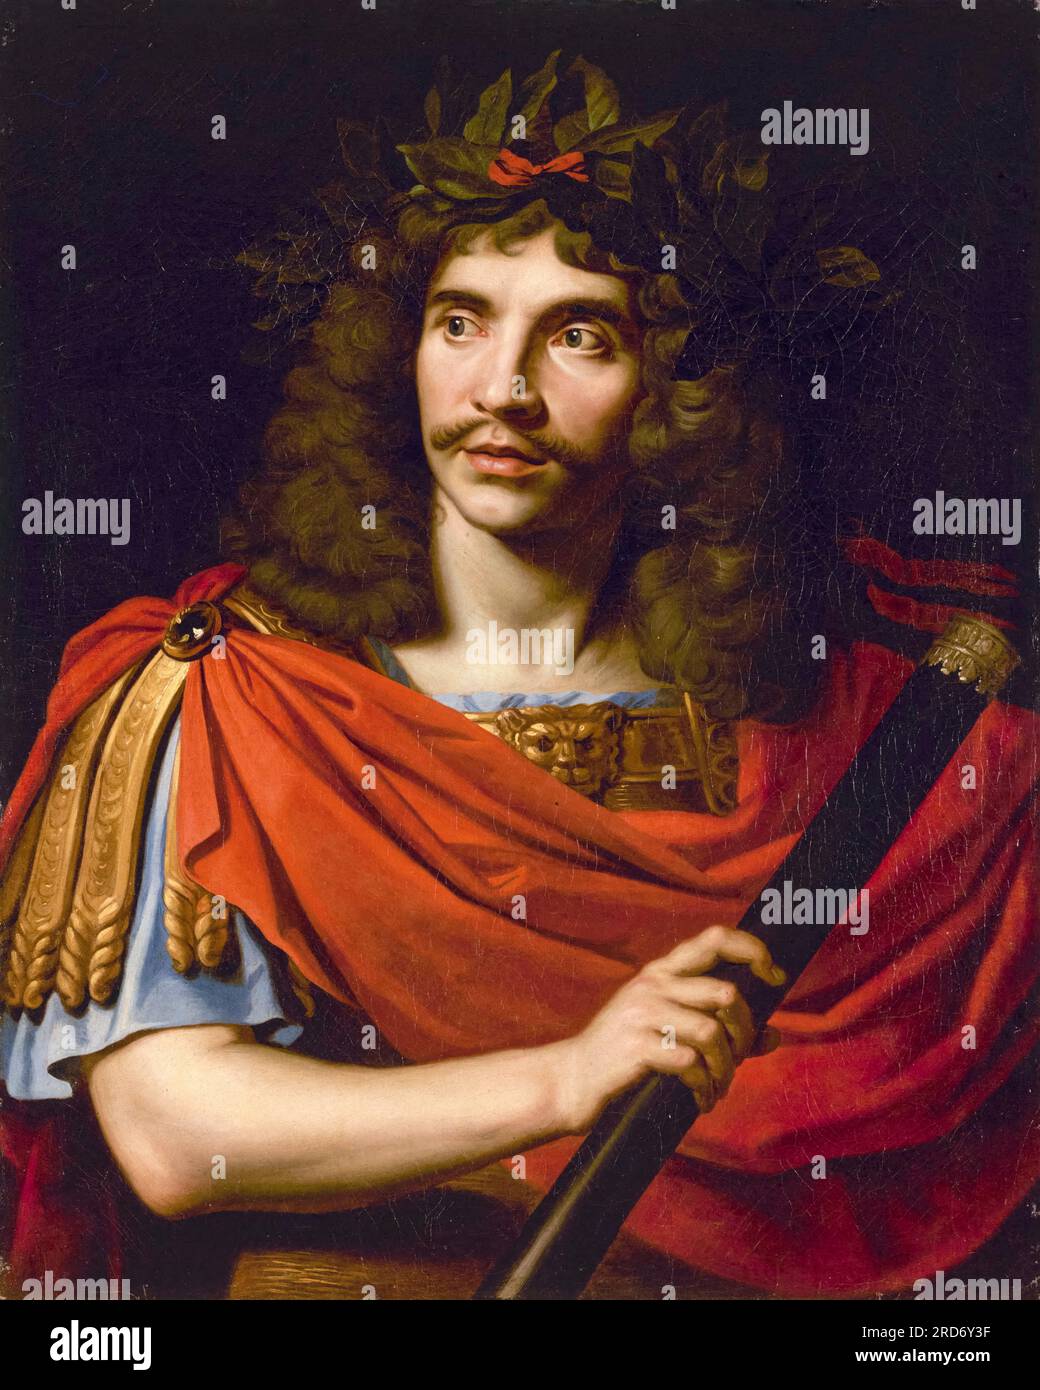 Molière (Jean-Baptiste Poquelin, 1622-1673) as Caesar in The Death of Pompey, portrait painting in oil on canvas by Nicolas Mignard, circa 1650 Stock Photo